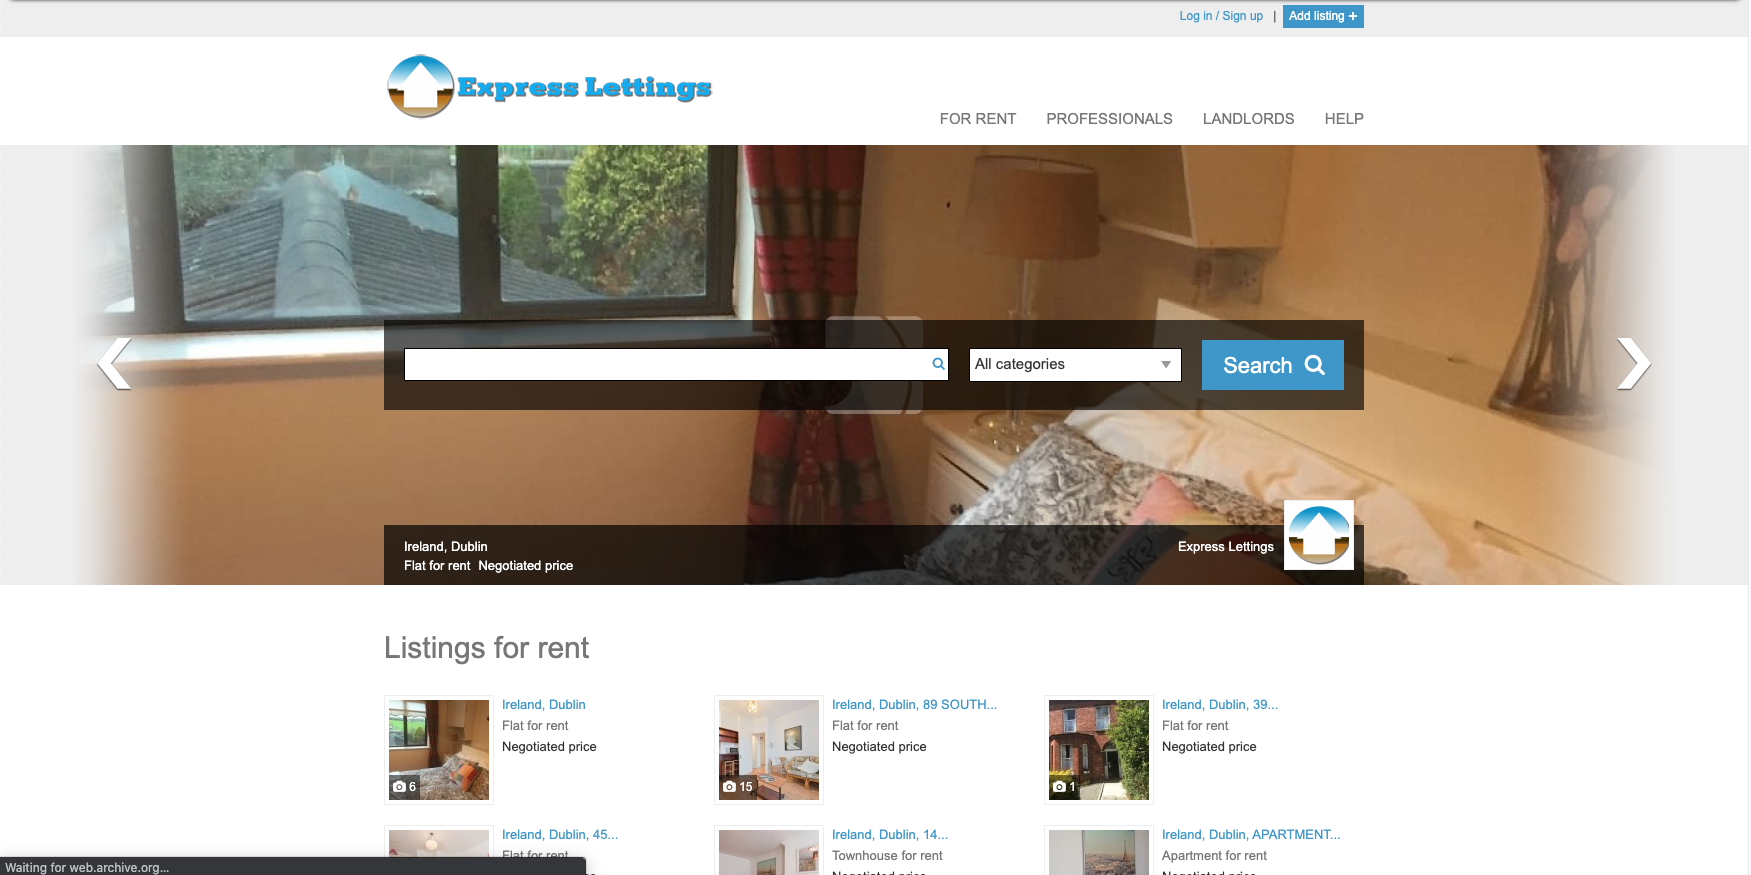 The old unresponsive Express Lettings website